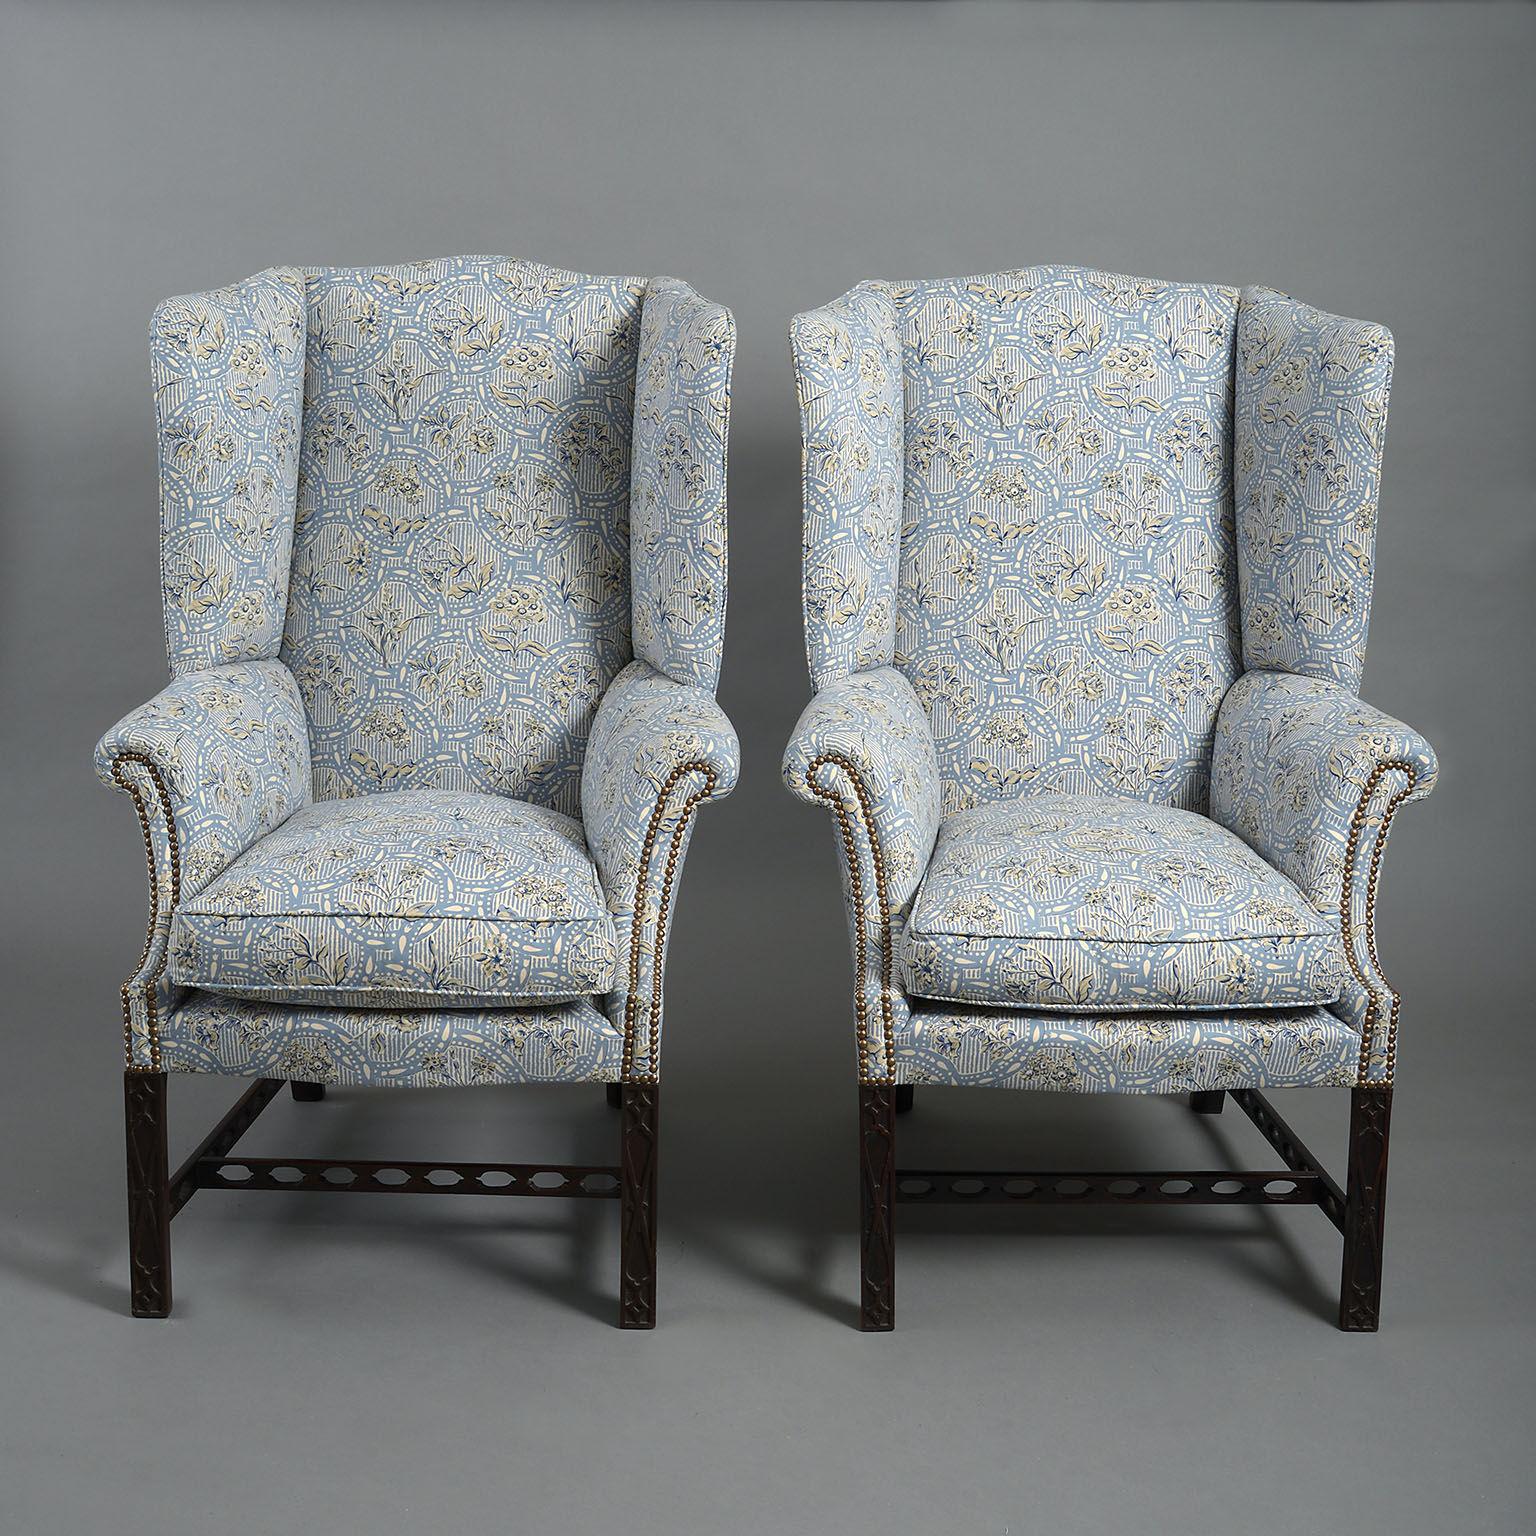 The serpentine cresting leading down to well-shaped wings above scroll arms with close-nailed detail. The seats feather-filled pads standing on blind-fret decorated legs joined by pierced stretchers. Fully re-upholstered and with new feather